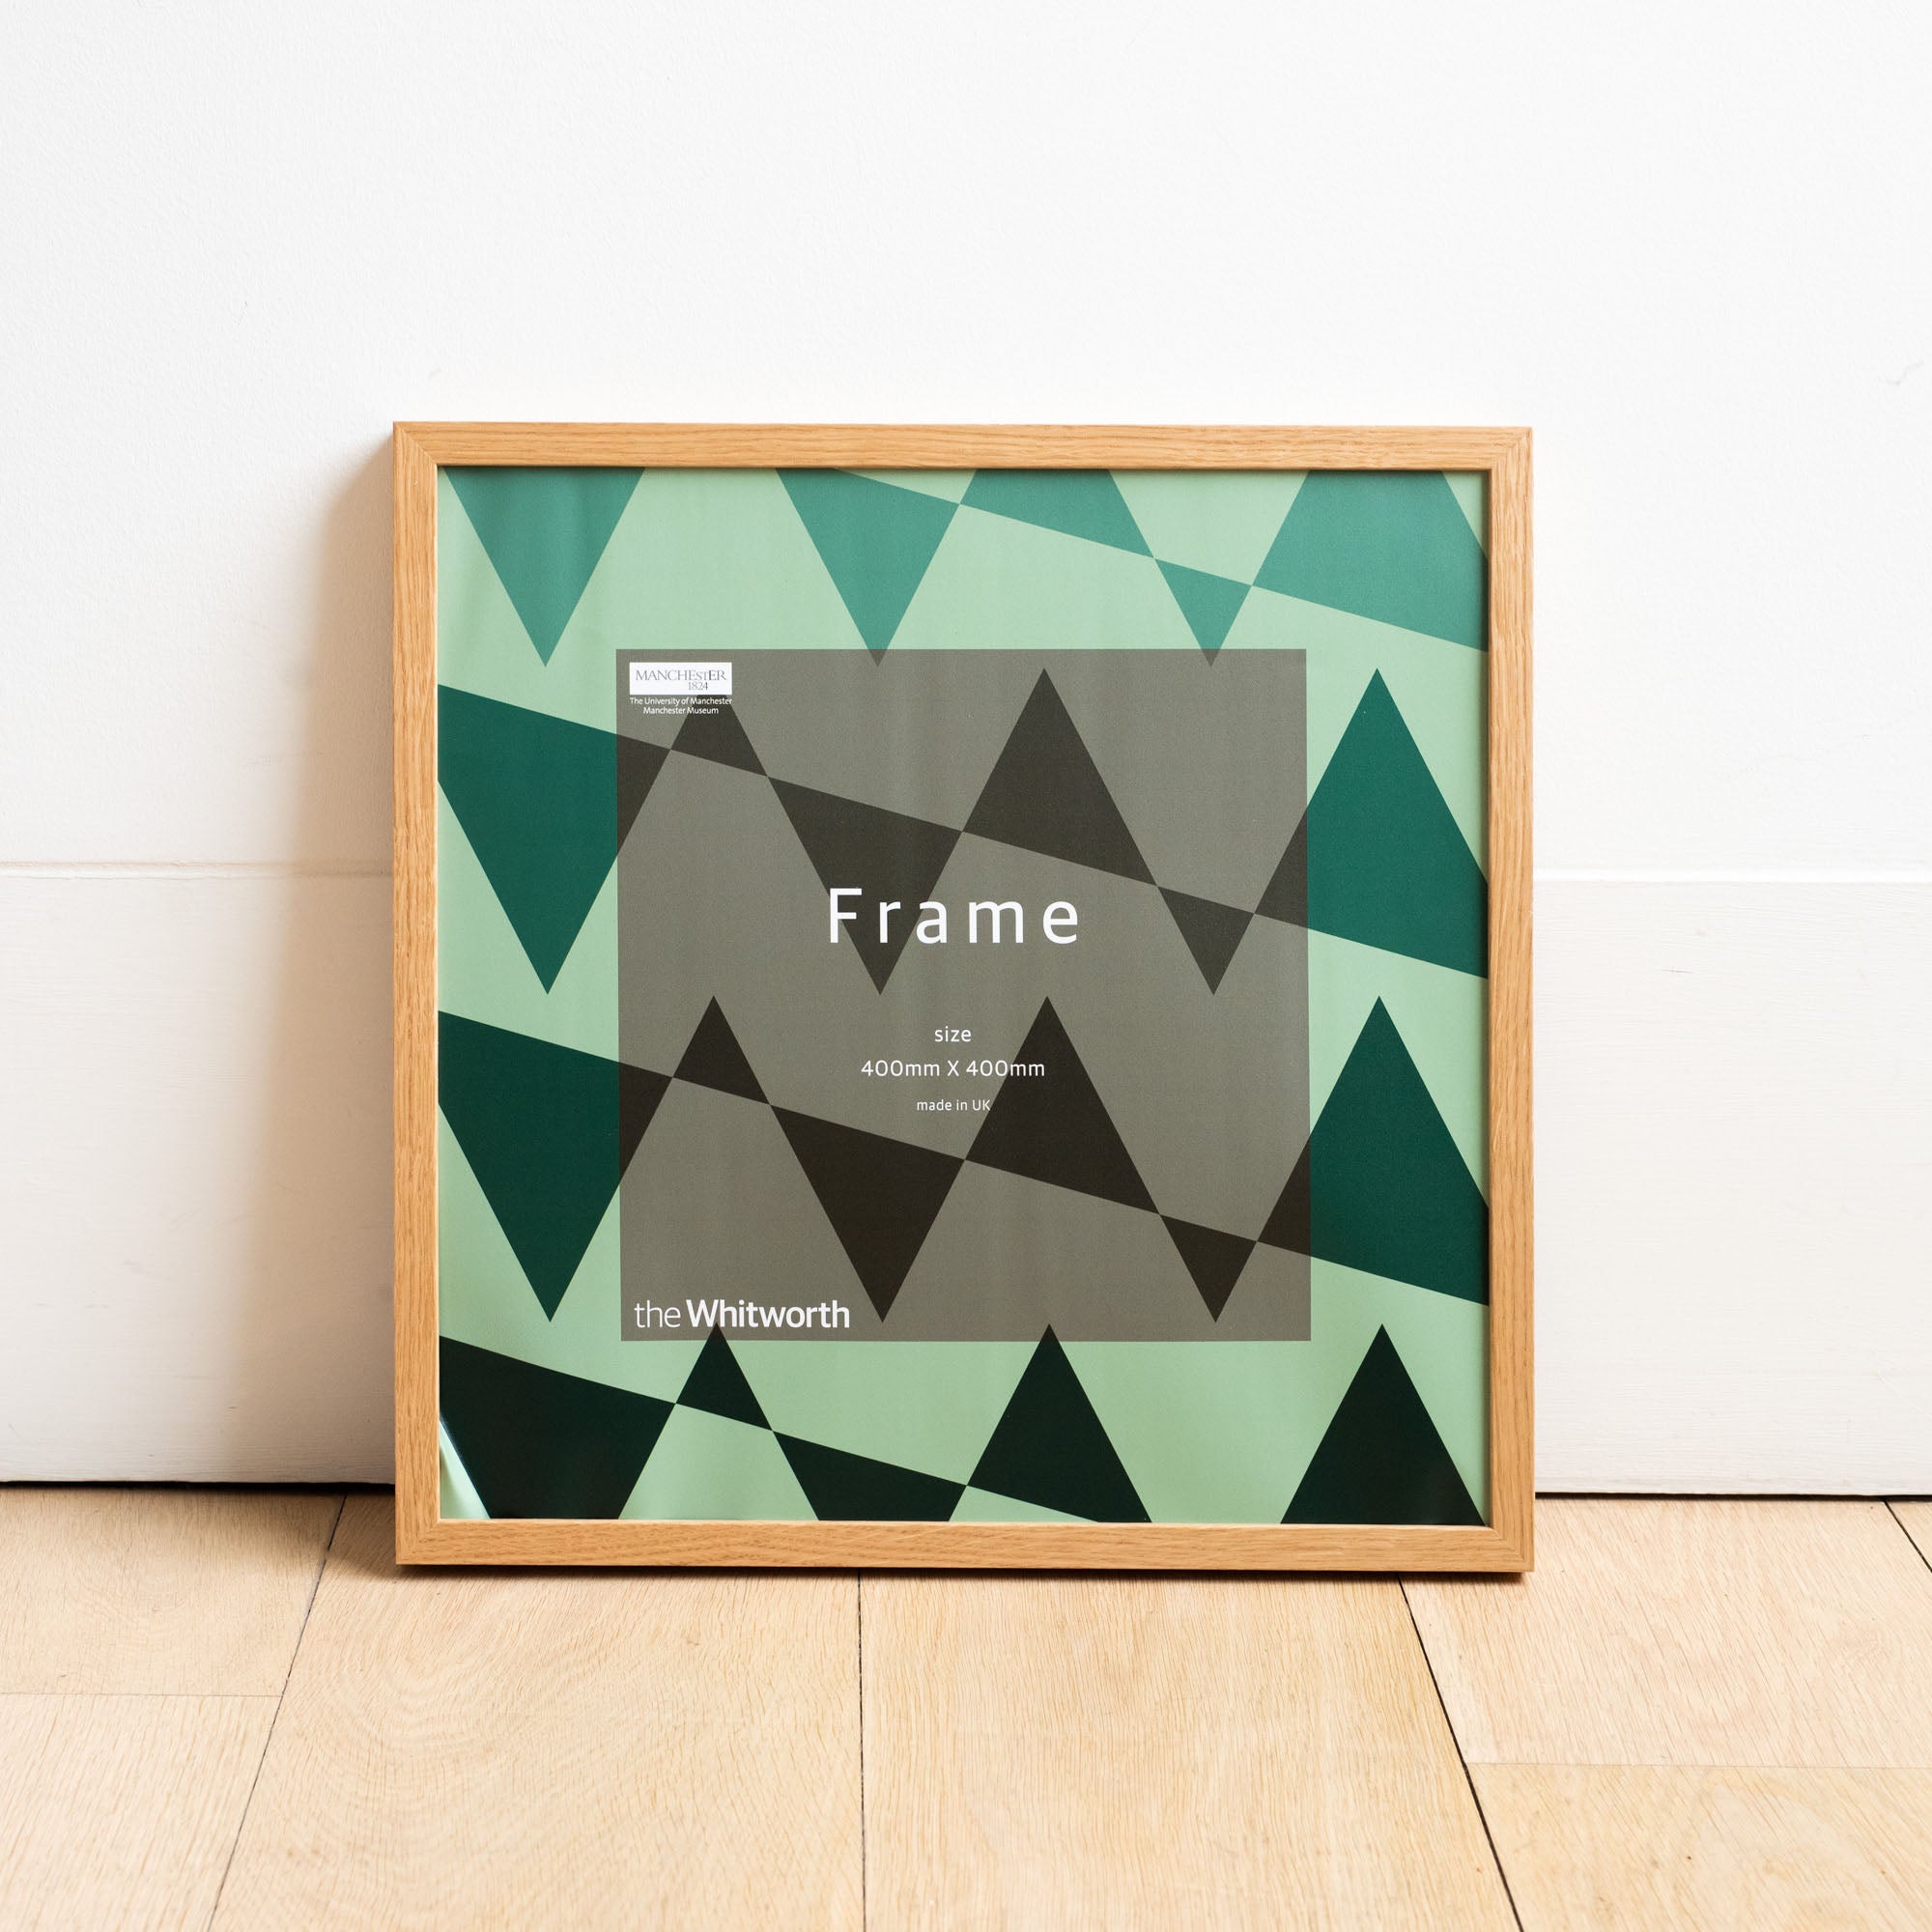 Natural ash square frame. Whitworth branded backing paper inside which is a green triangular pattern.